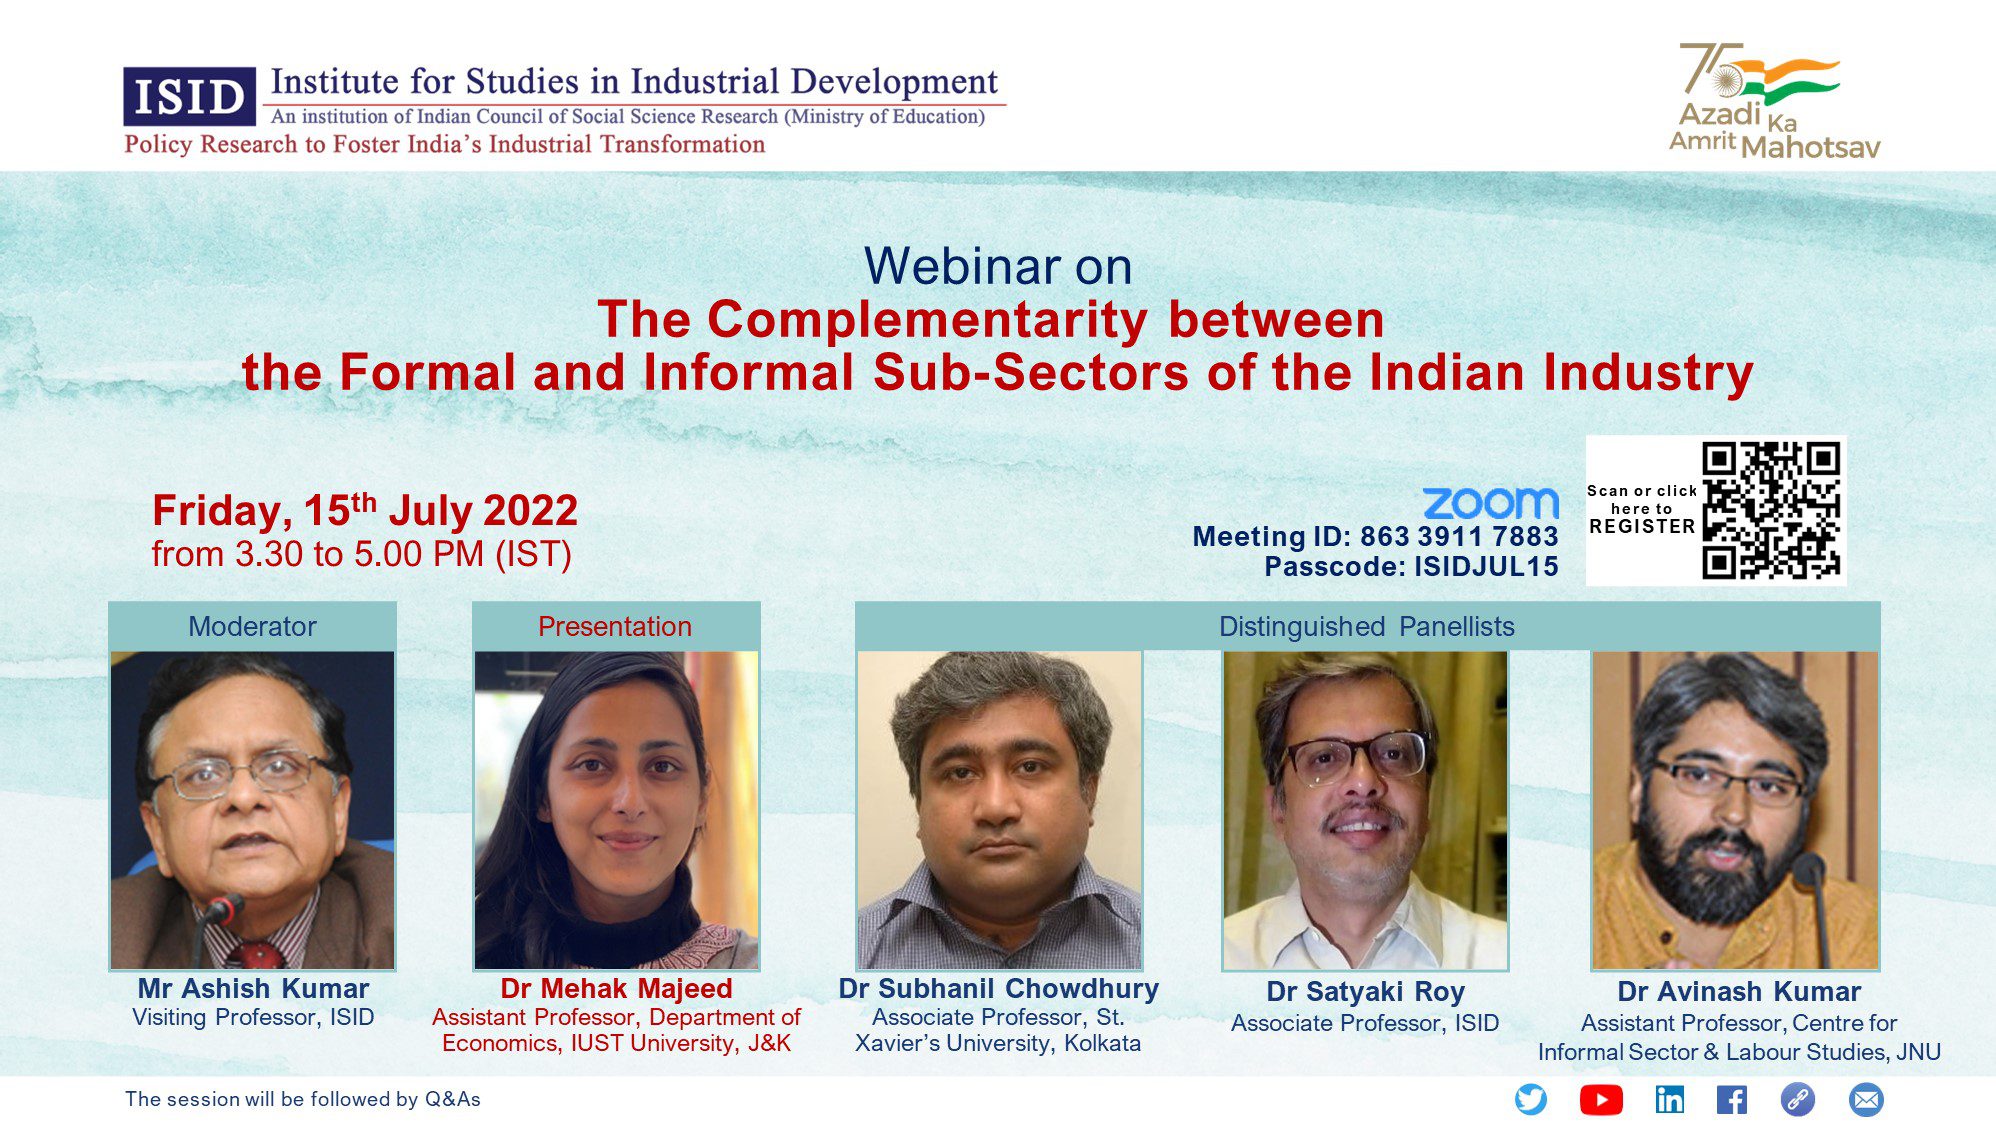 Webinar on the Complementarity between the Formal and Informal Sub-Sectors of the Indian Industry